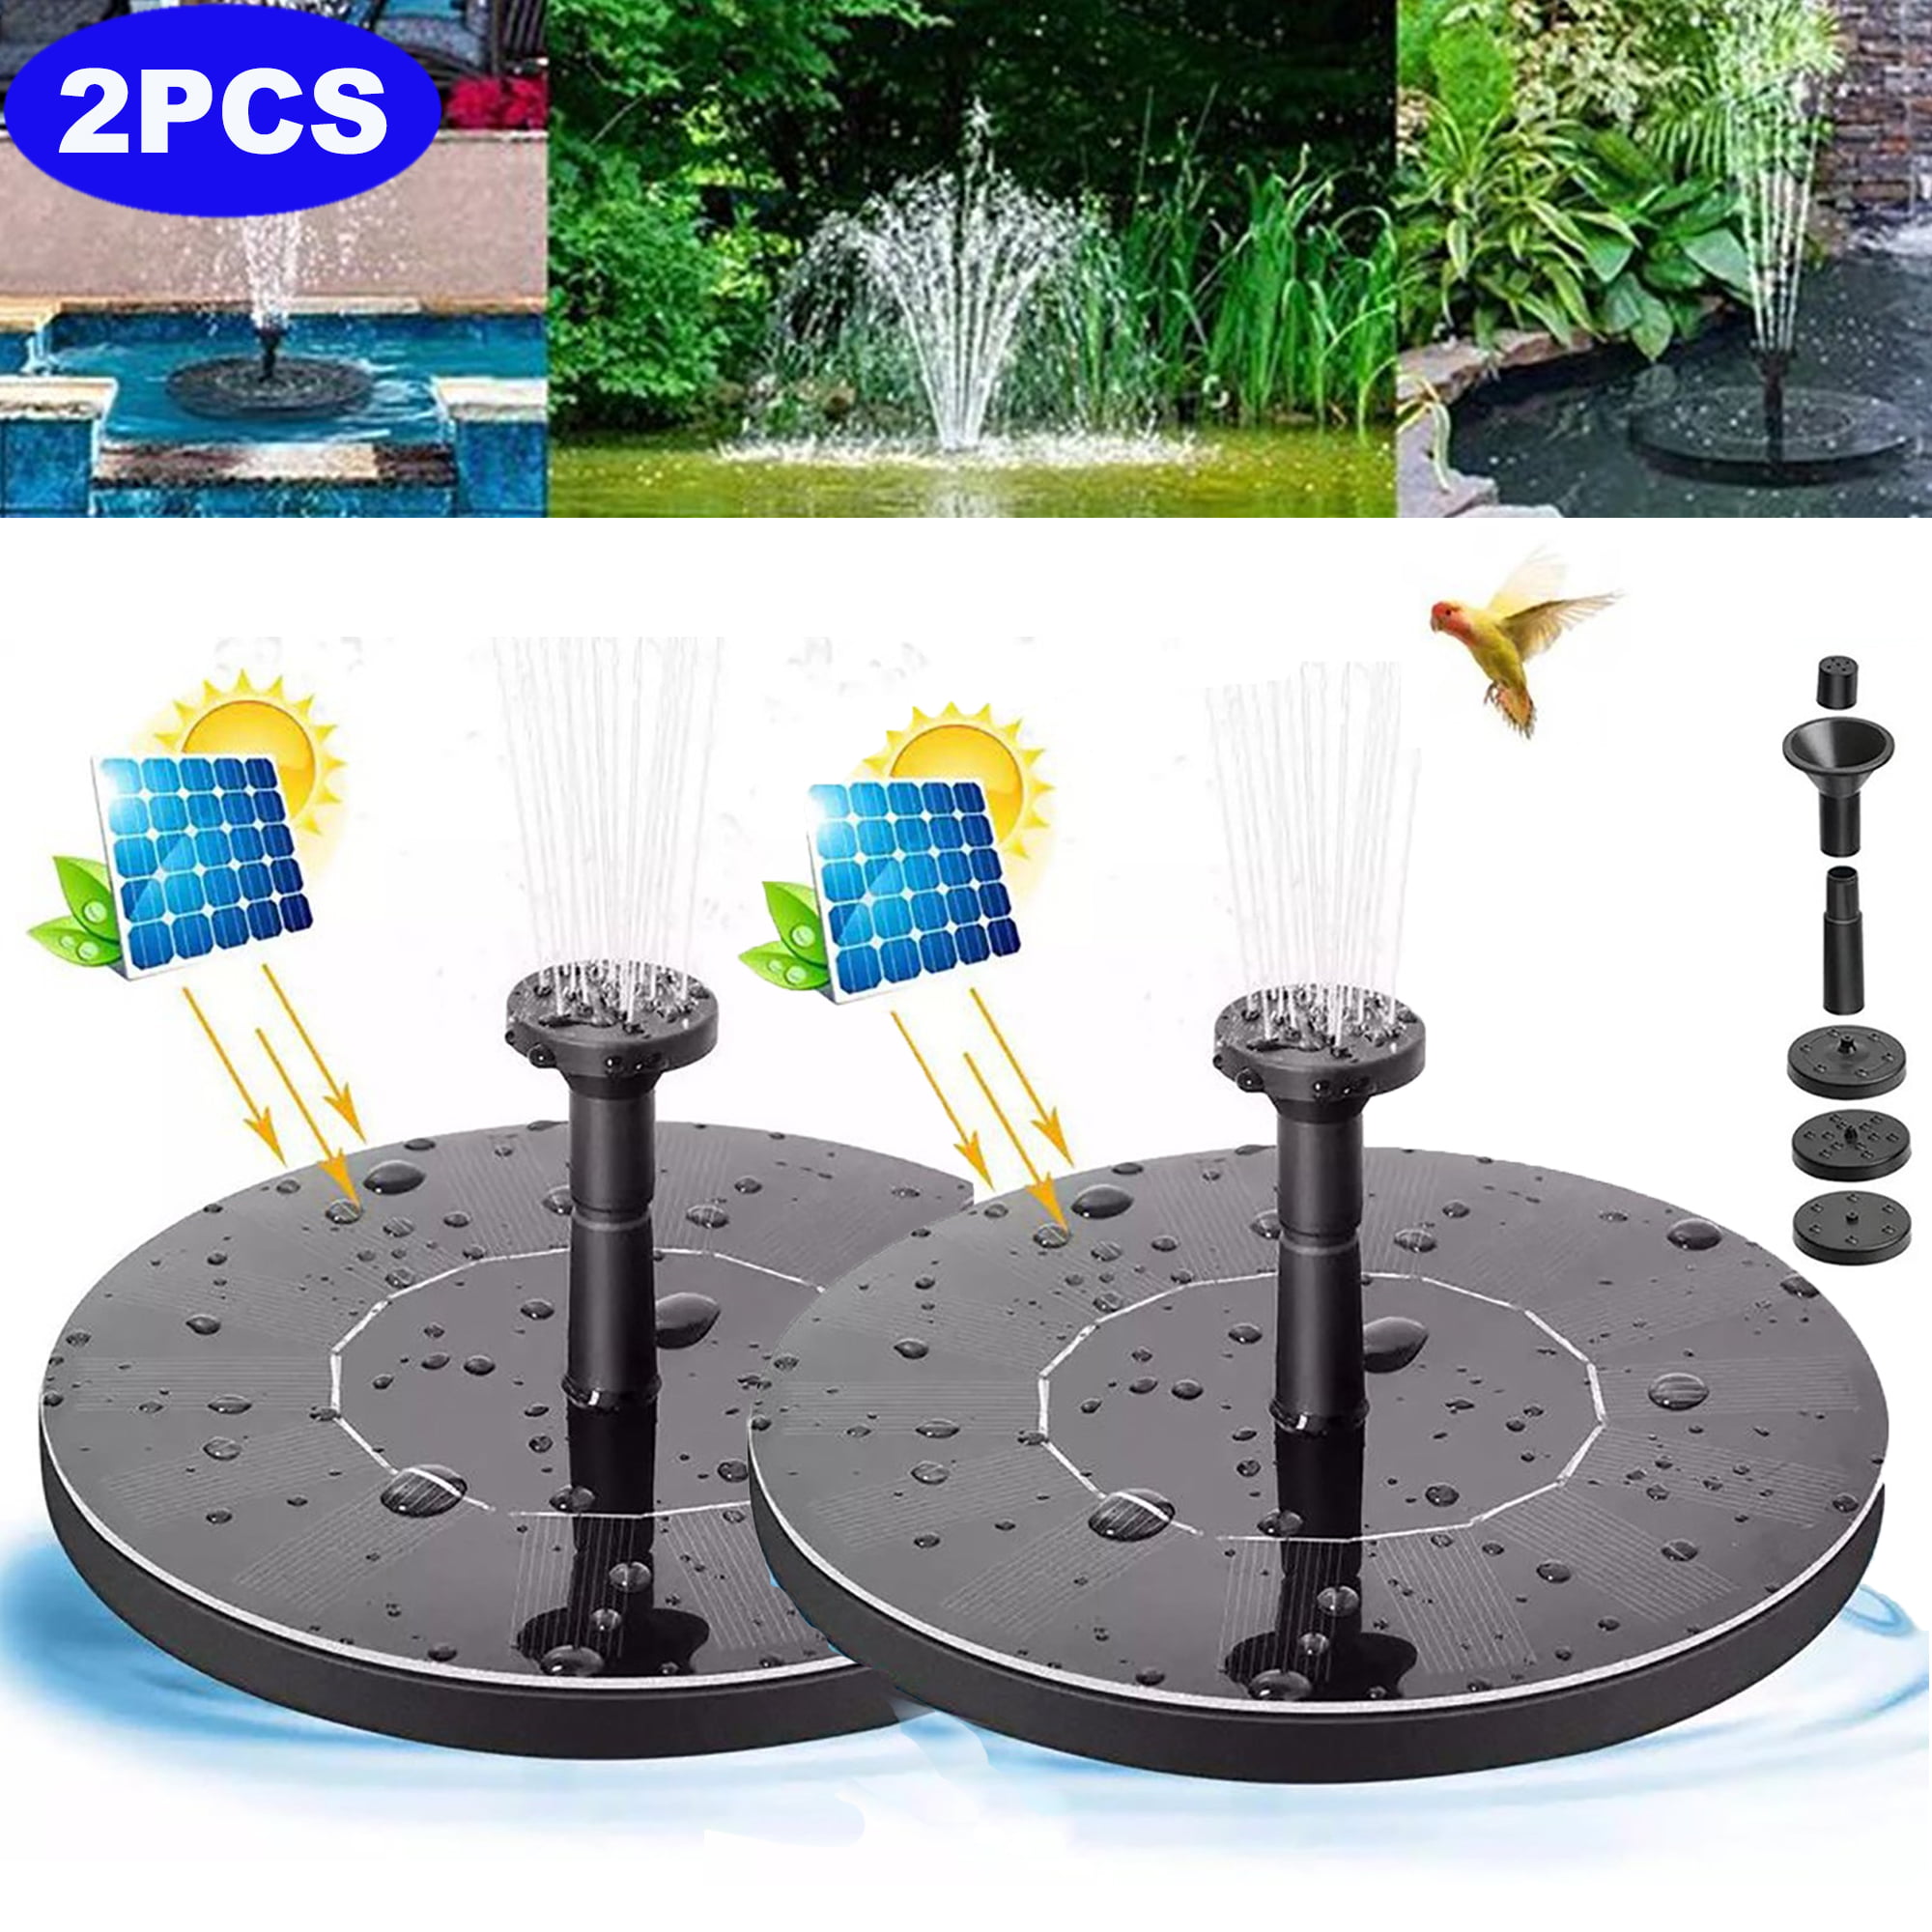 Pool Solar Bird Bath Fountain,Innovative Outdoor Floating Fountain with 6 Nozzle,Free Standing Solar Powered Water Fountain Pump with Water Level Monitoring for Garden Pond